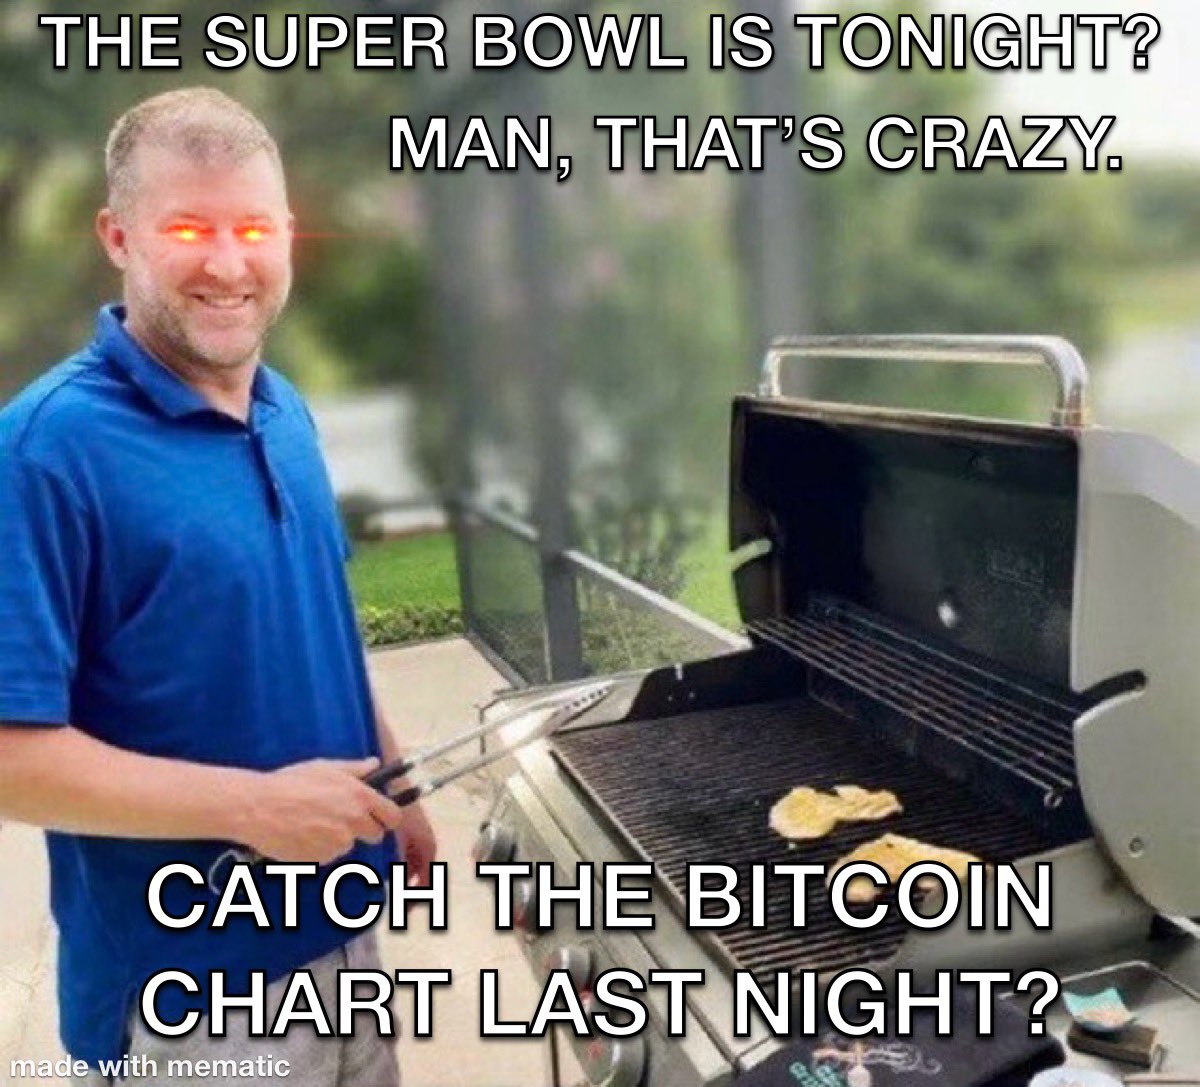 THE SUPER BOWL IS TONIGHT?
MAN, THAT'S CRAZY.
CATCH THE BITCOIN
CHART LAST NIGHT?
made with mematic